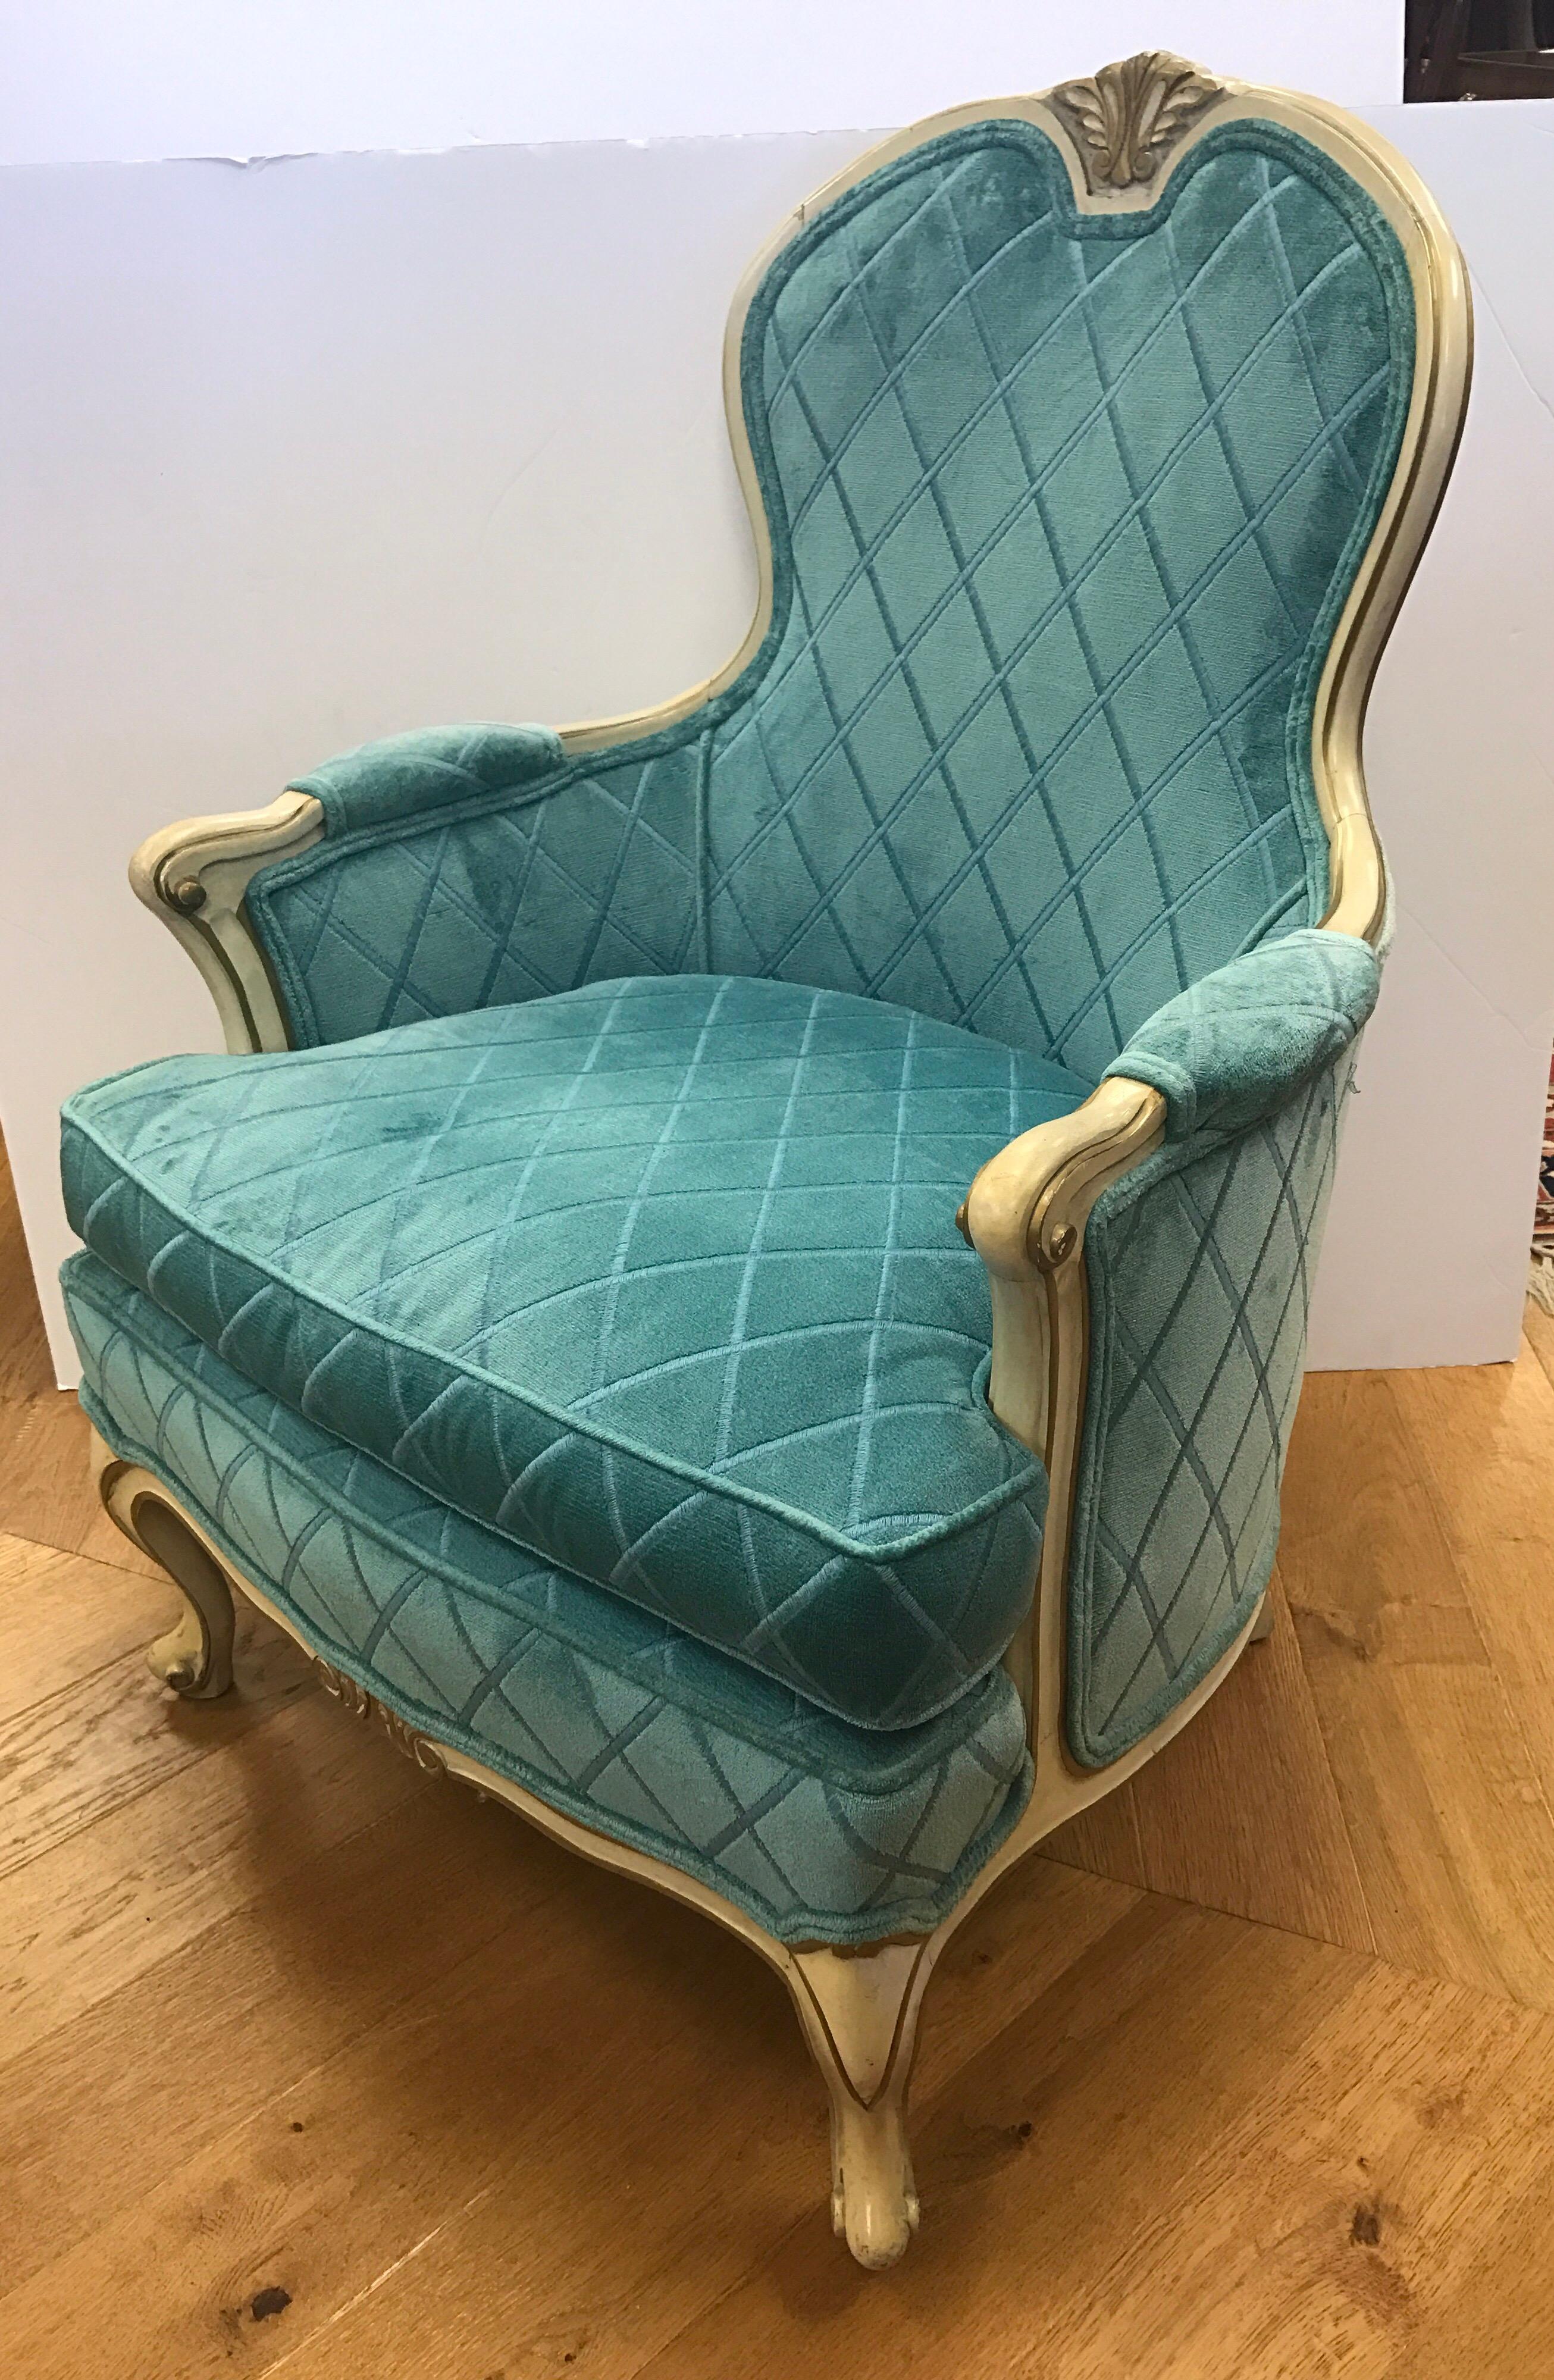 Stunning Louis XV bergere armchairs with a wonderful turquoise fabric. All dimensions are below and seat height is 18 inches.